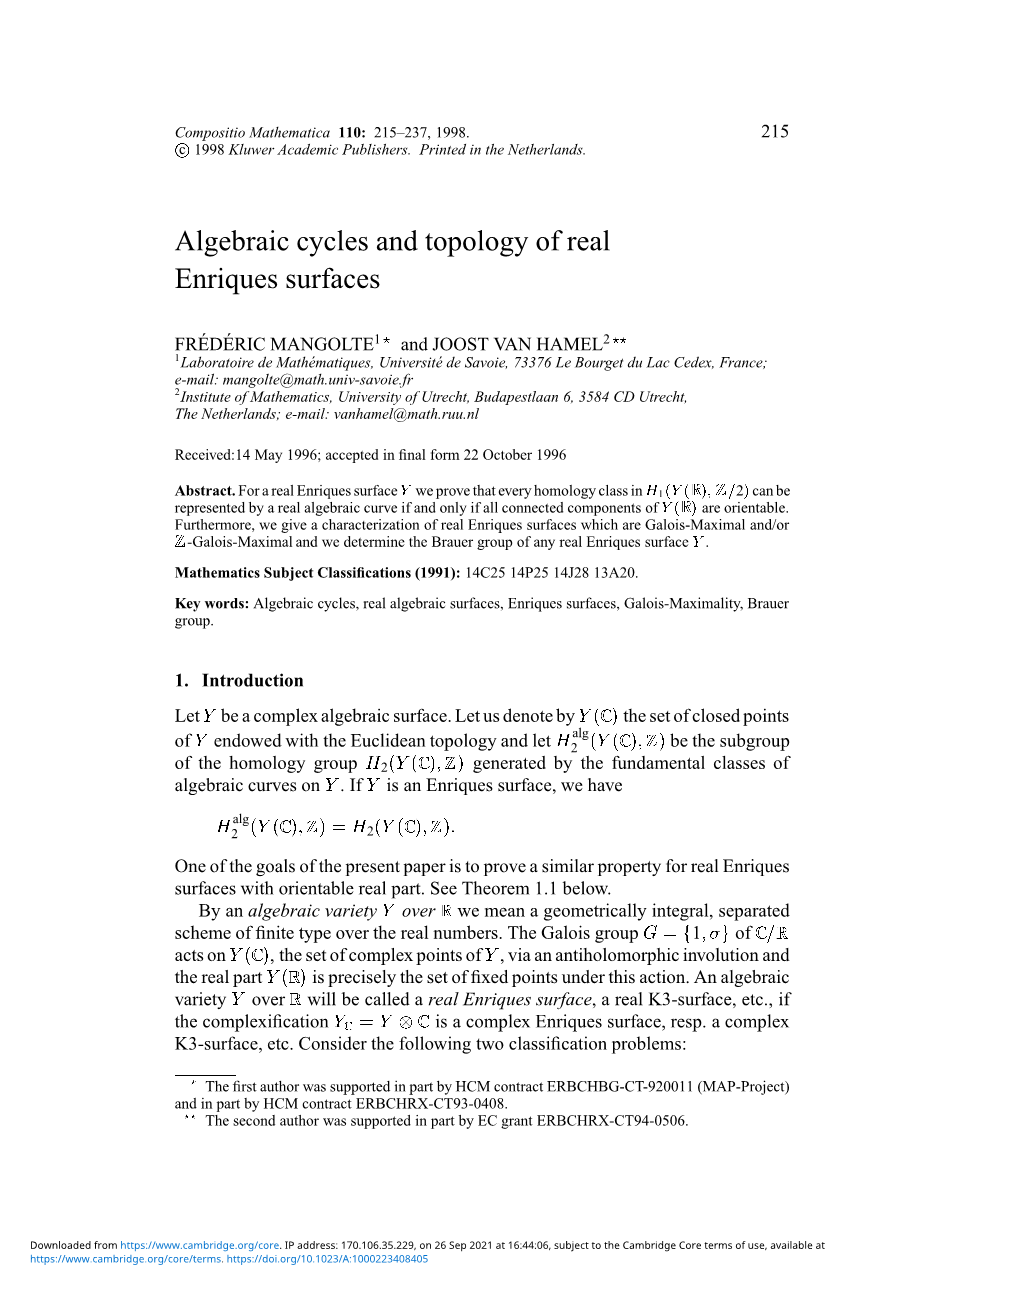 Algebraic Cycles and Topology of Real Enriques Surfaces